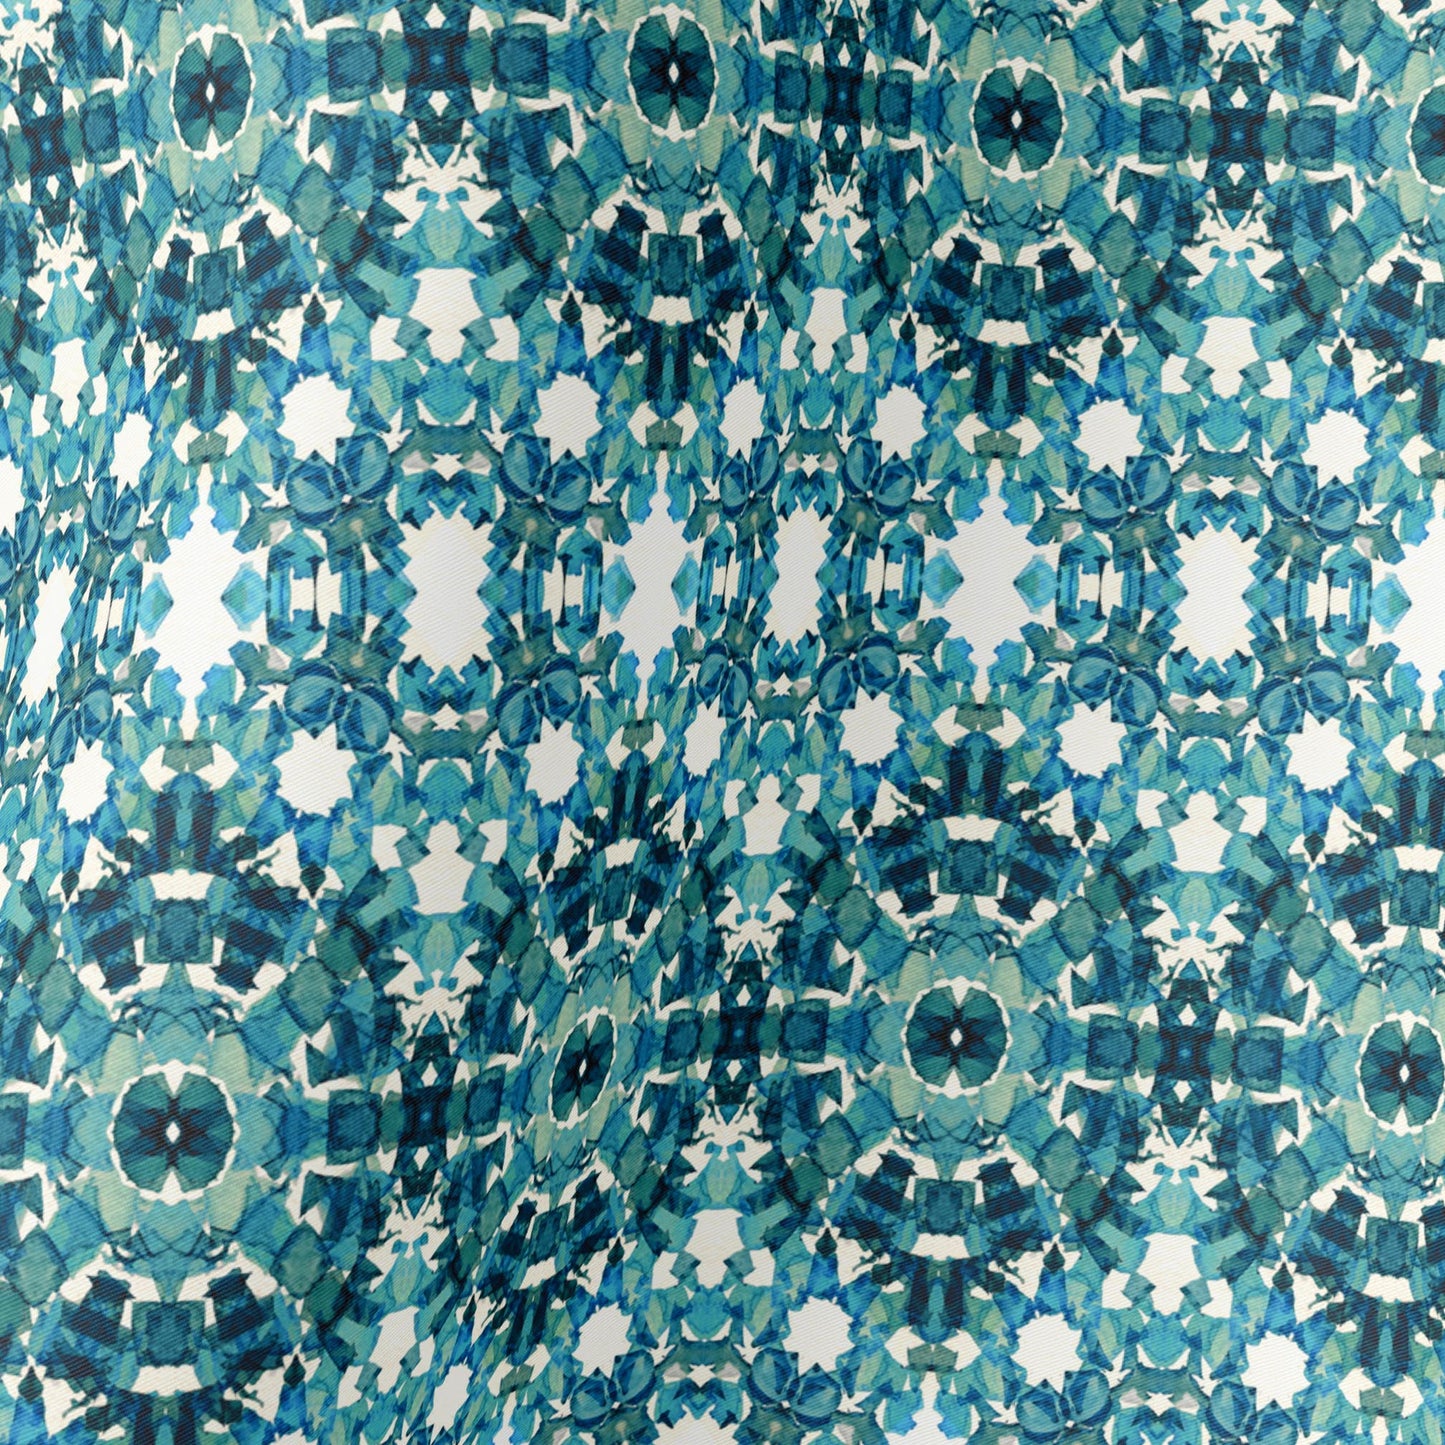 36x36 inch silk habotai scarf featuring a hand-painted pattern in teal, blue, and green tones.